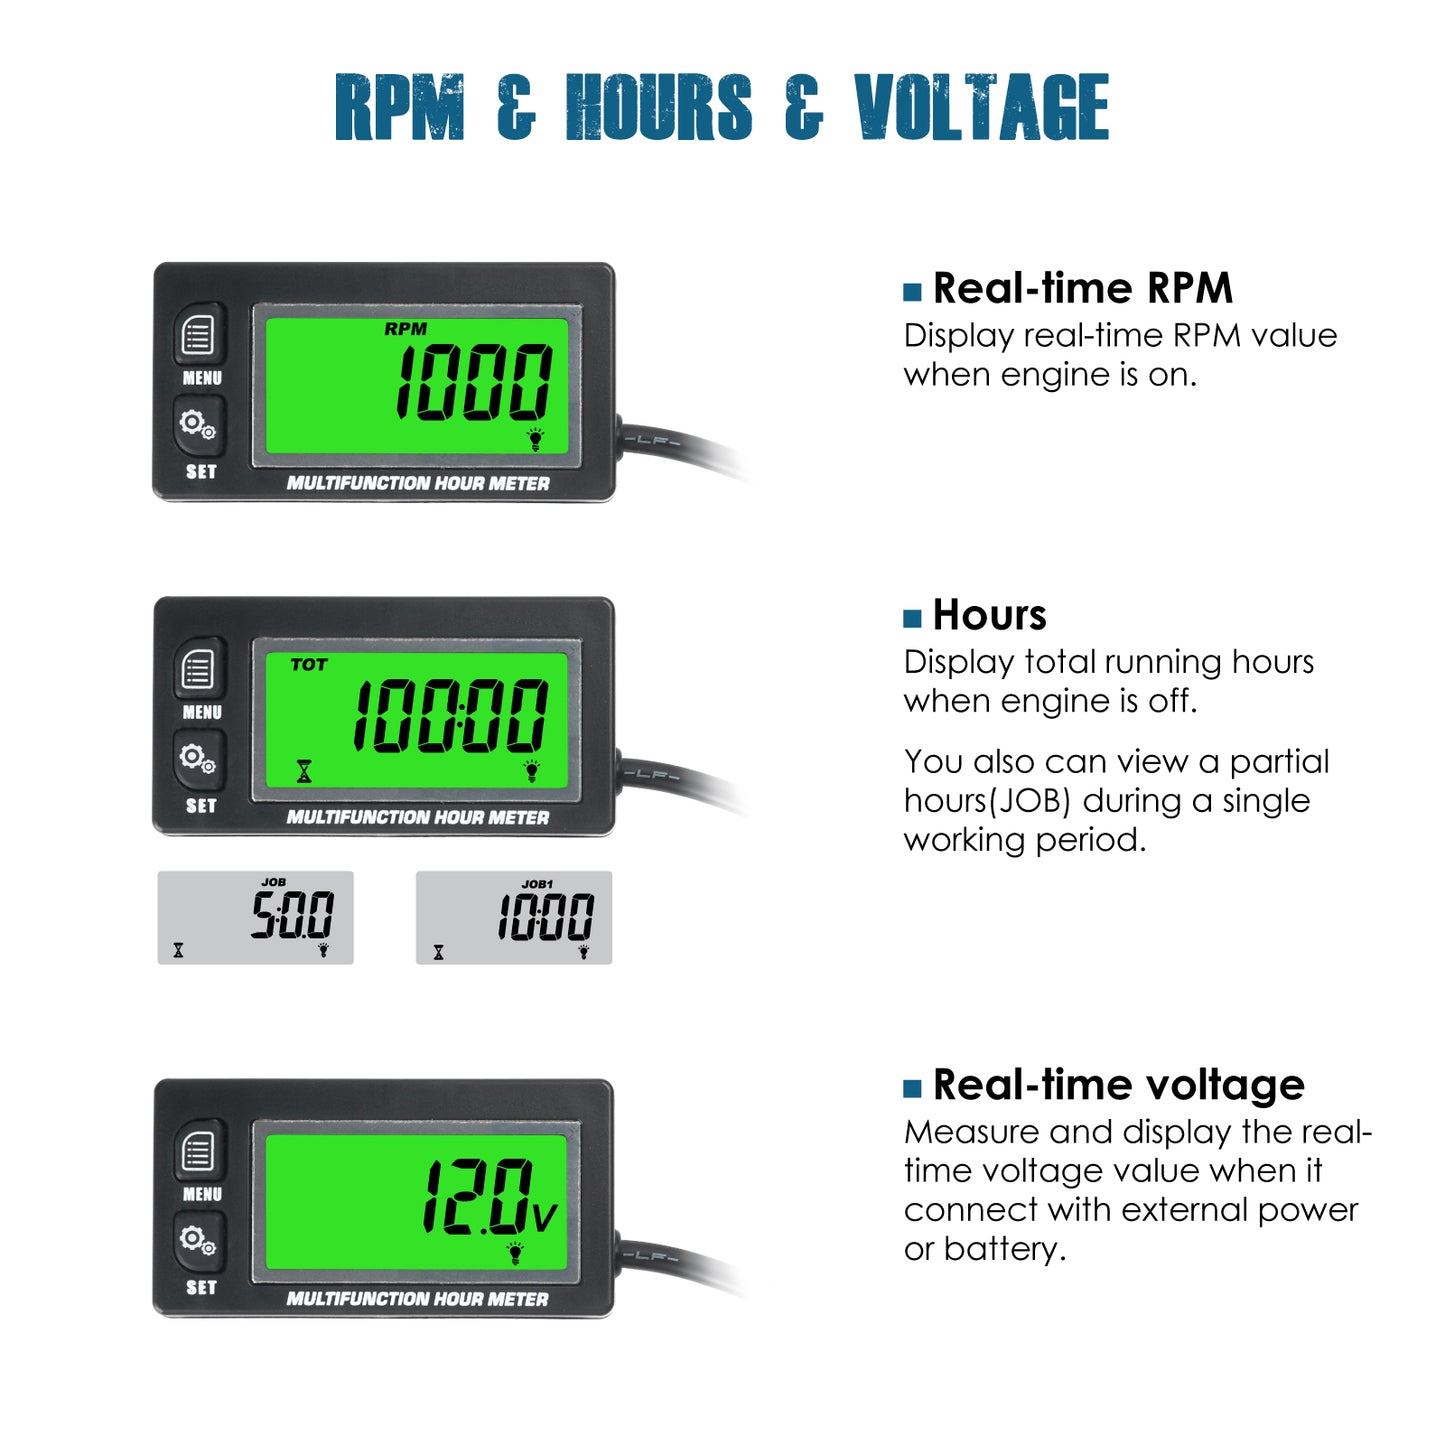 Runleader Digital Hours Tachometer, Battery Voltage Display, Backlight Display, Large LCD Screen, Battery Replaceable for Garden Mower Generator